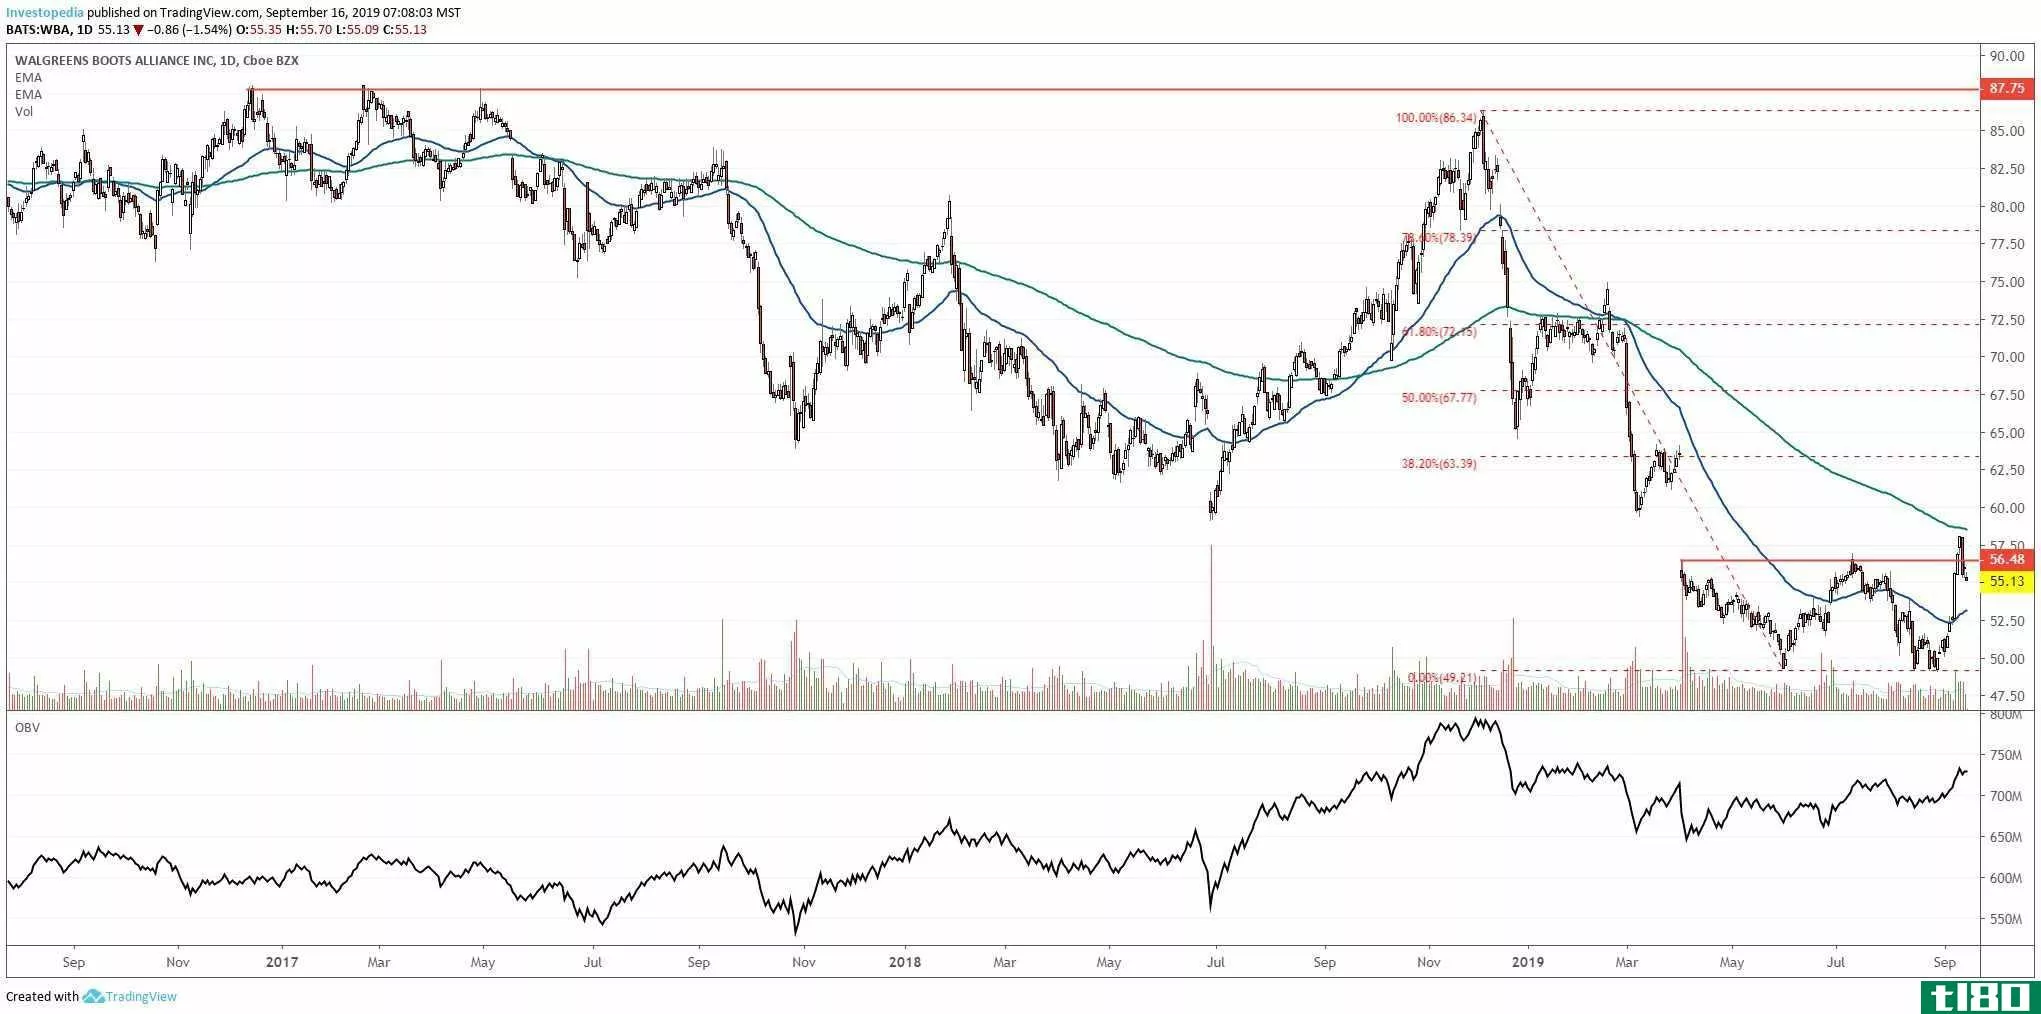 Short-term chart showing the share pricer performance of Walgreens Boots Alliance, Inc. (WBA)